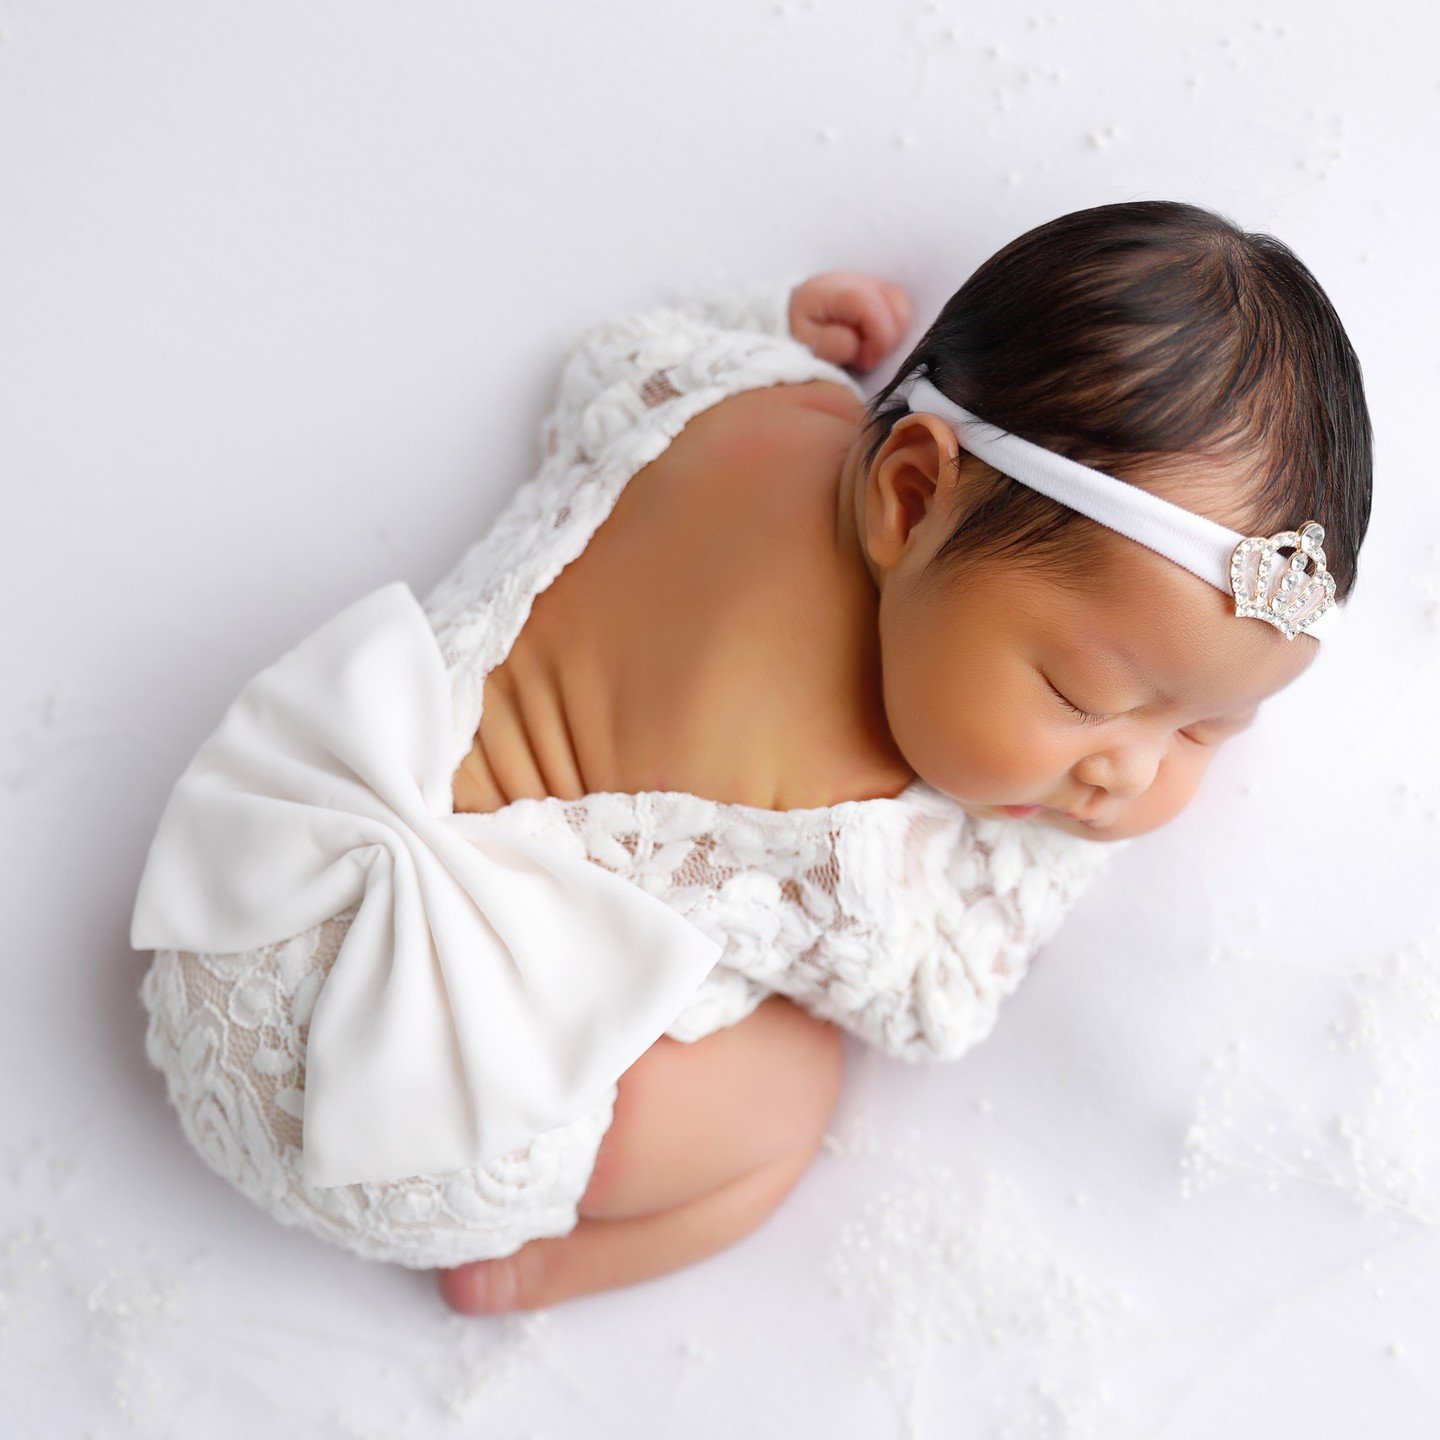 Baby Ximena an absolutely beautiful baby. ➡️www.anabrandt.com

#NewbornPhotography
#CaliforniaPhotographer
#CelebrityPhotographer
#NewbornPosing
#PhotographyTips
#BehindTheScenes
#BTSPhotography
#newbornPhotographyTutorials
#newbornPhotographyInspira